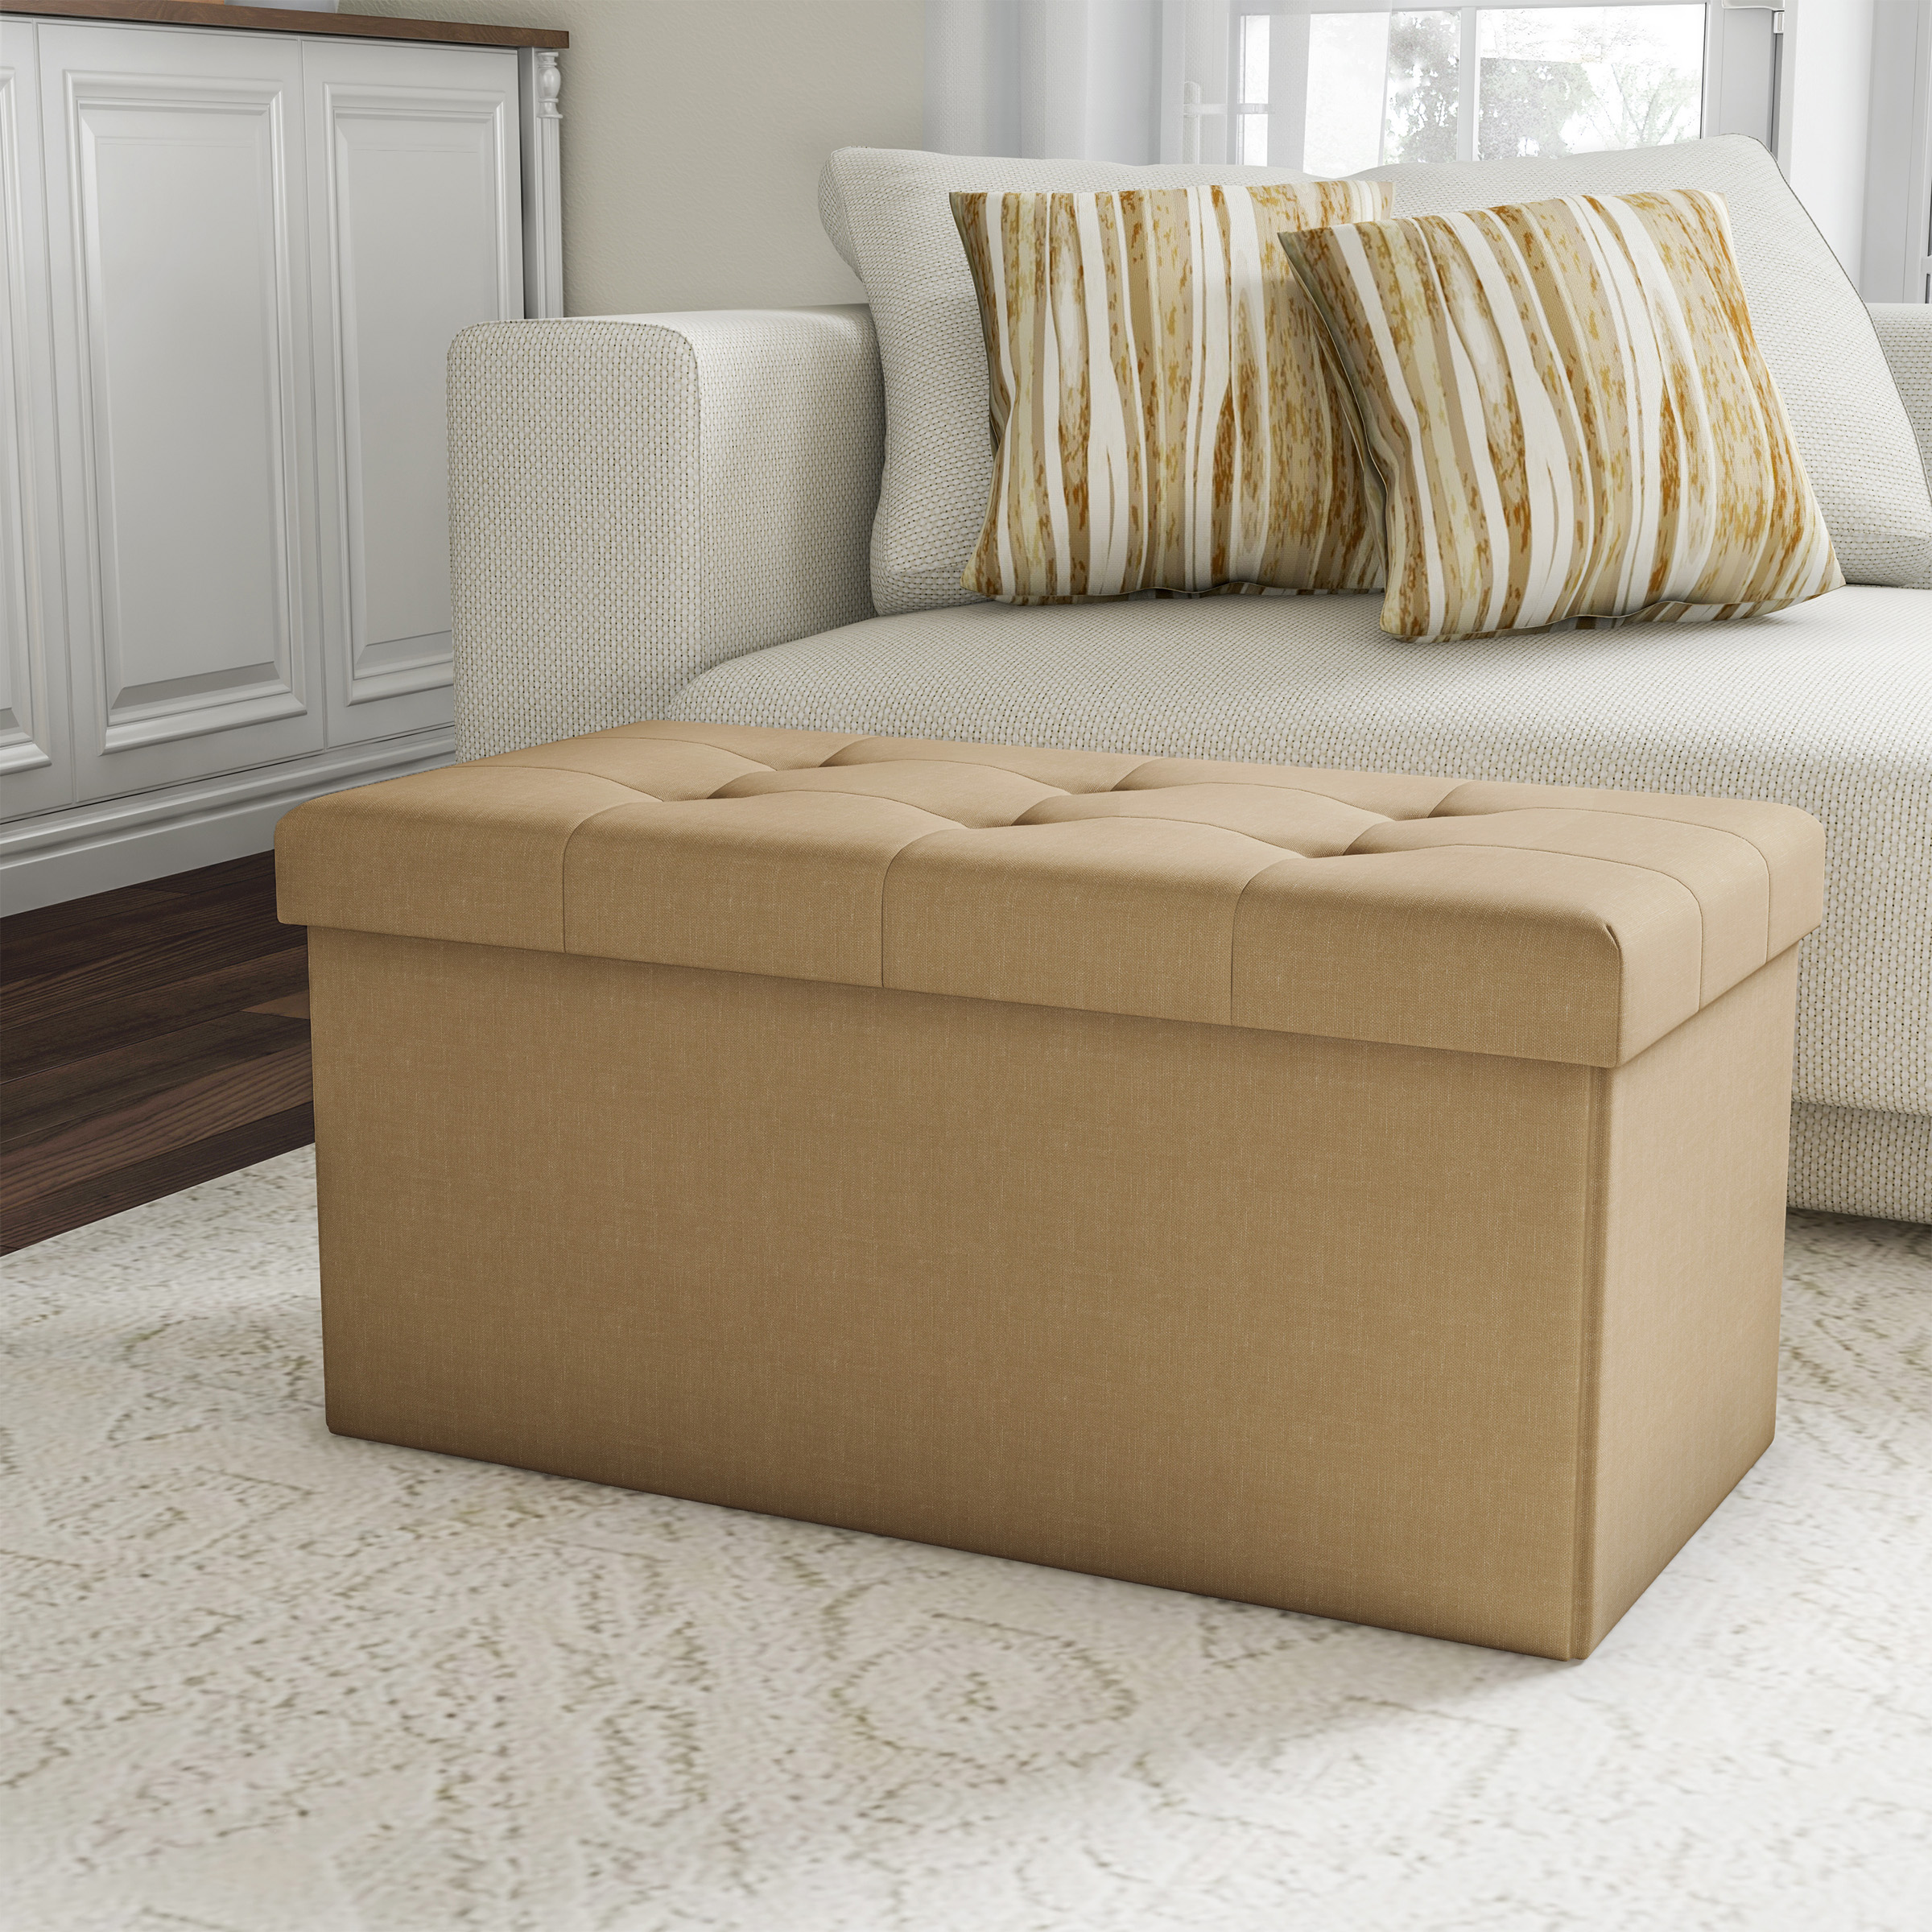 Lavish Home 30-inch Folding Storage Ottoman with Removable Bin (Beige) - image 2 of 8